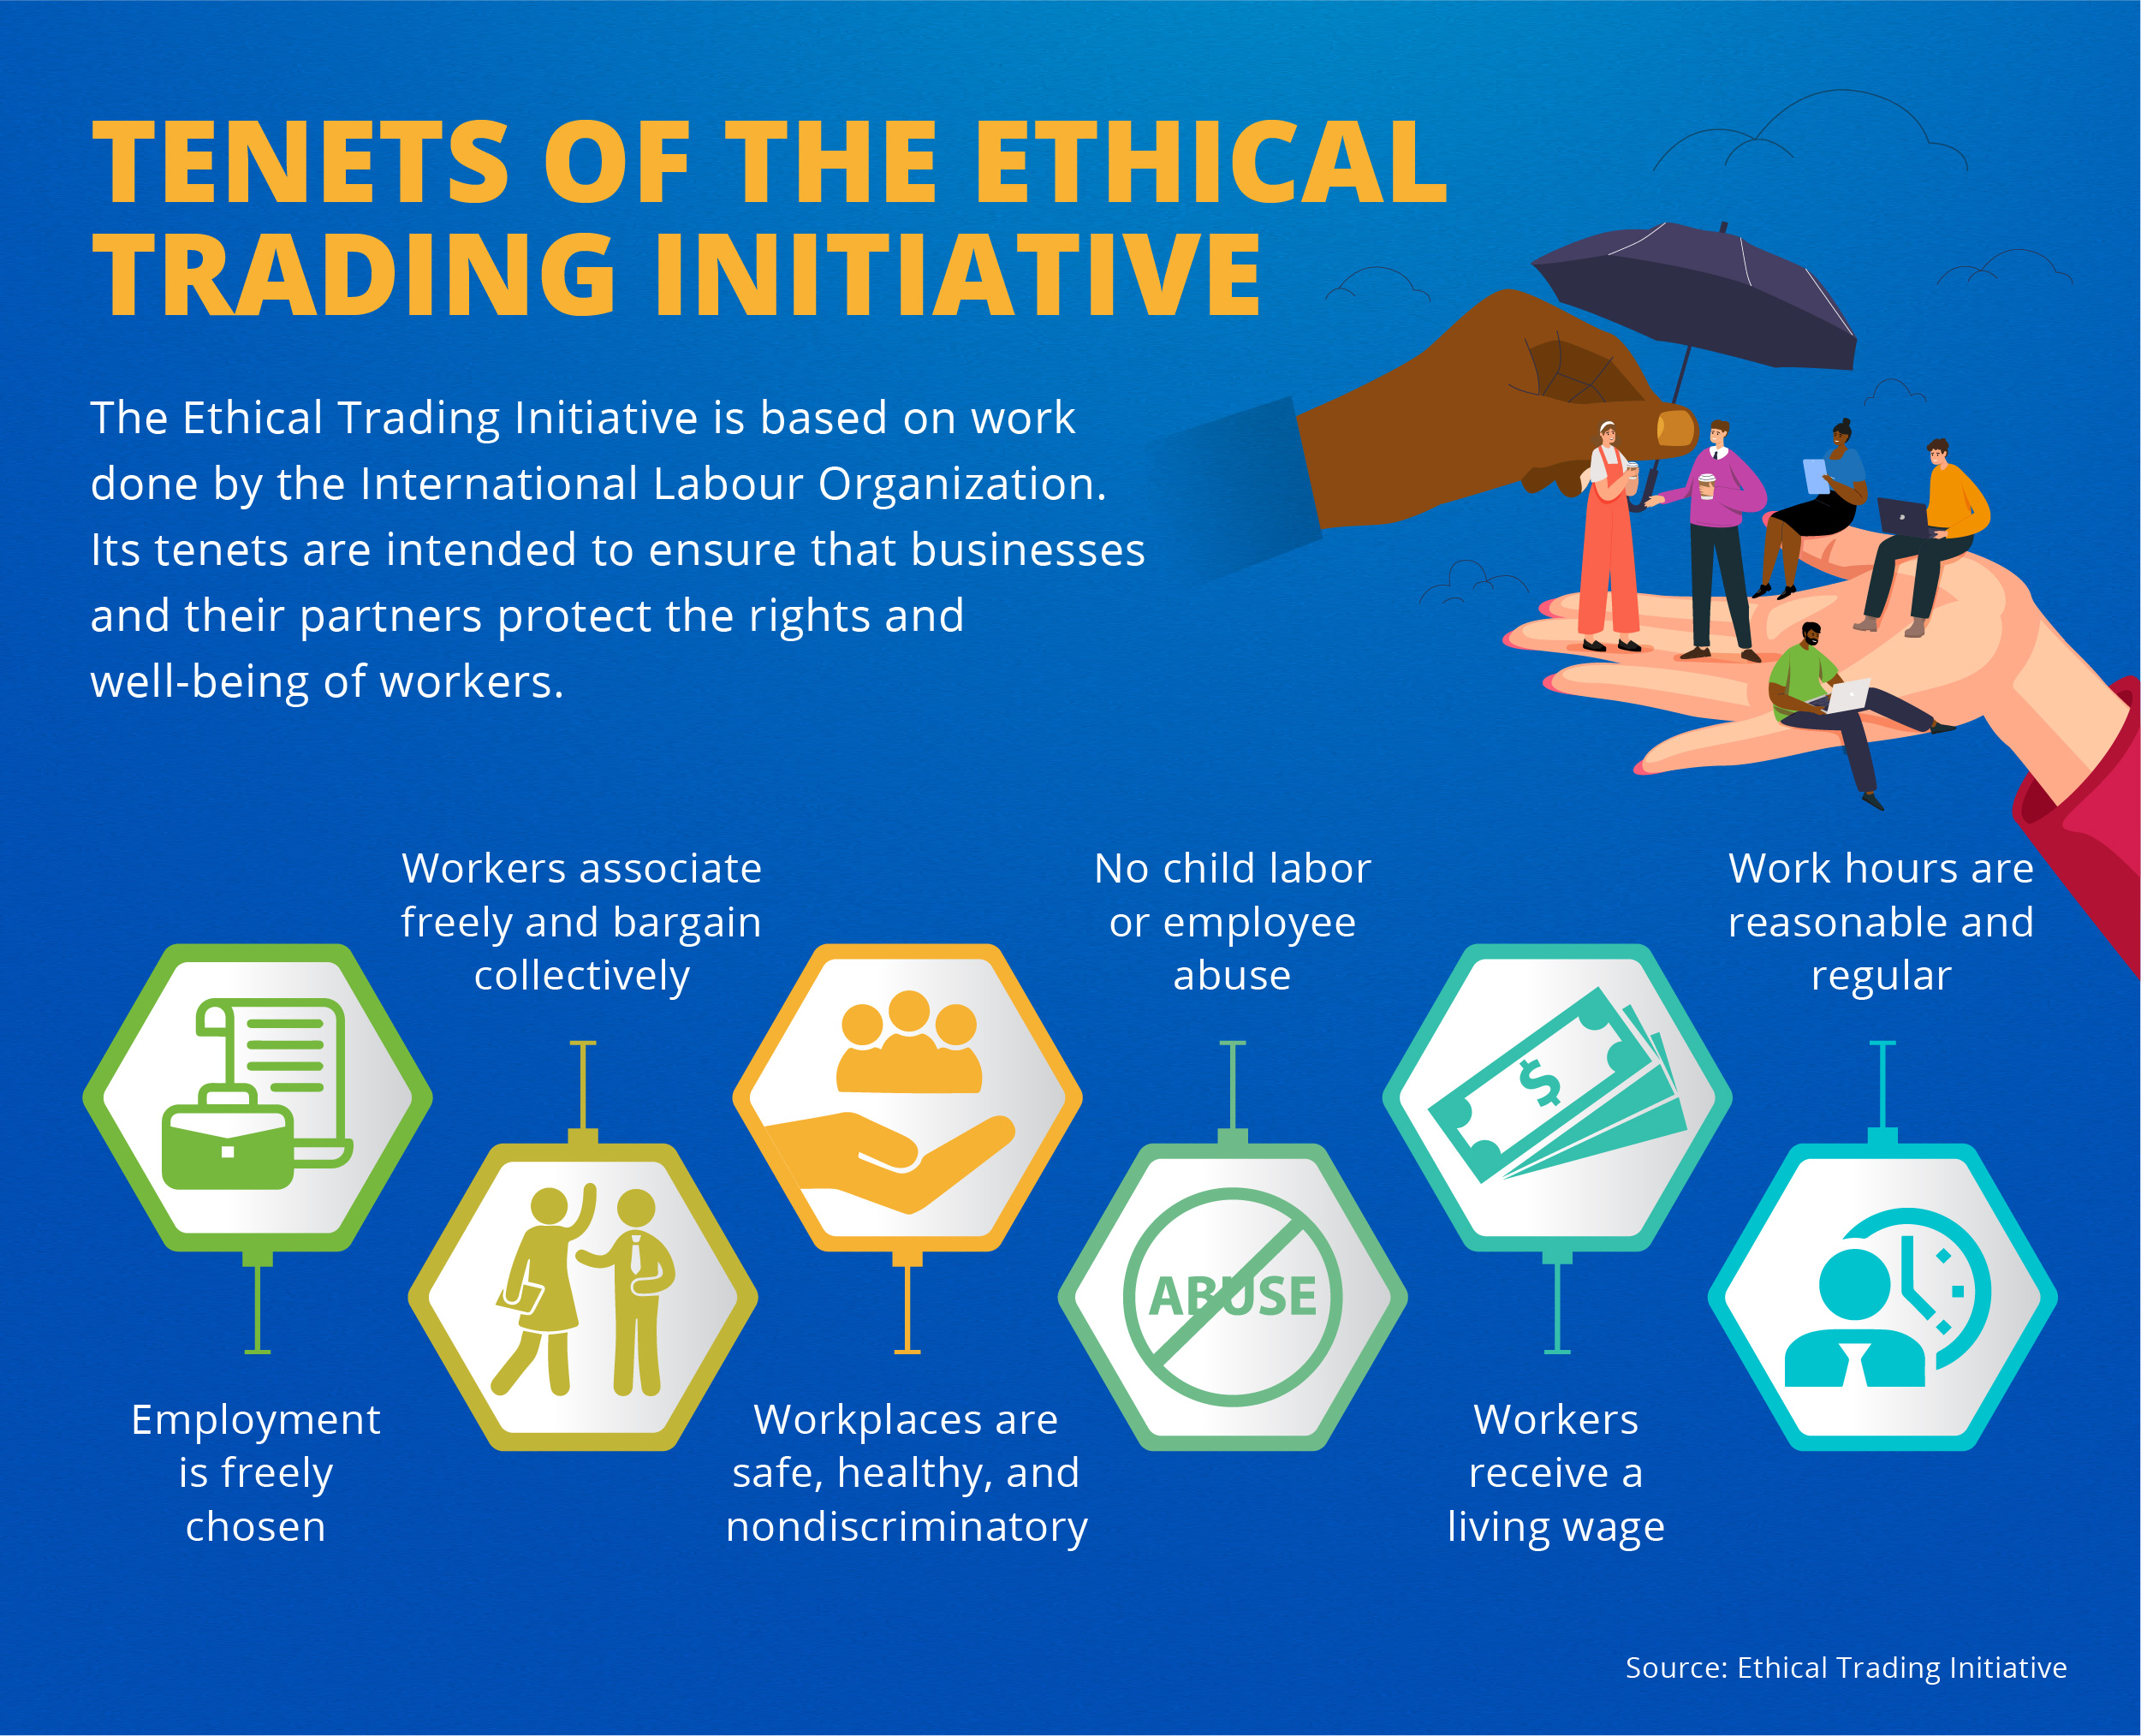 The Ethical Trading Initiative’s tenets aim to protect the rights of workers.